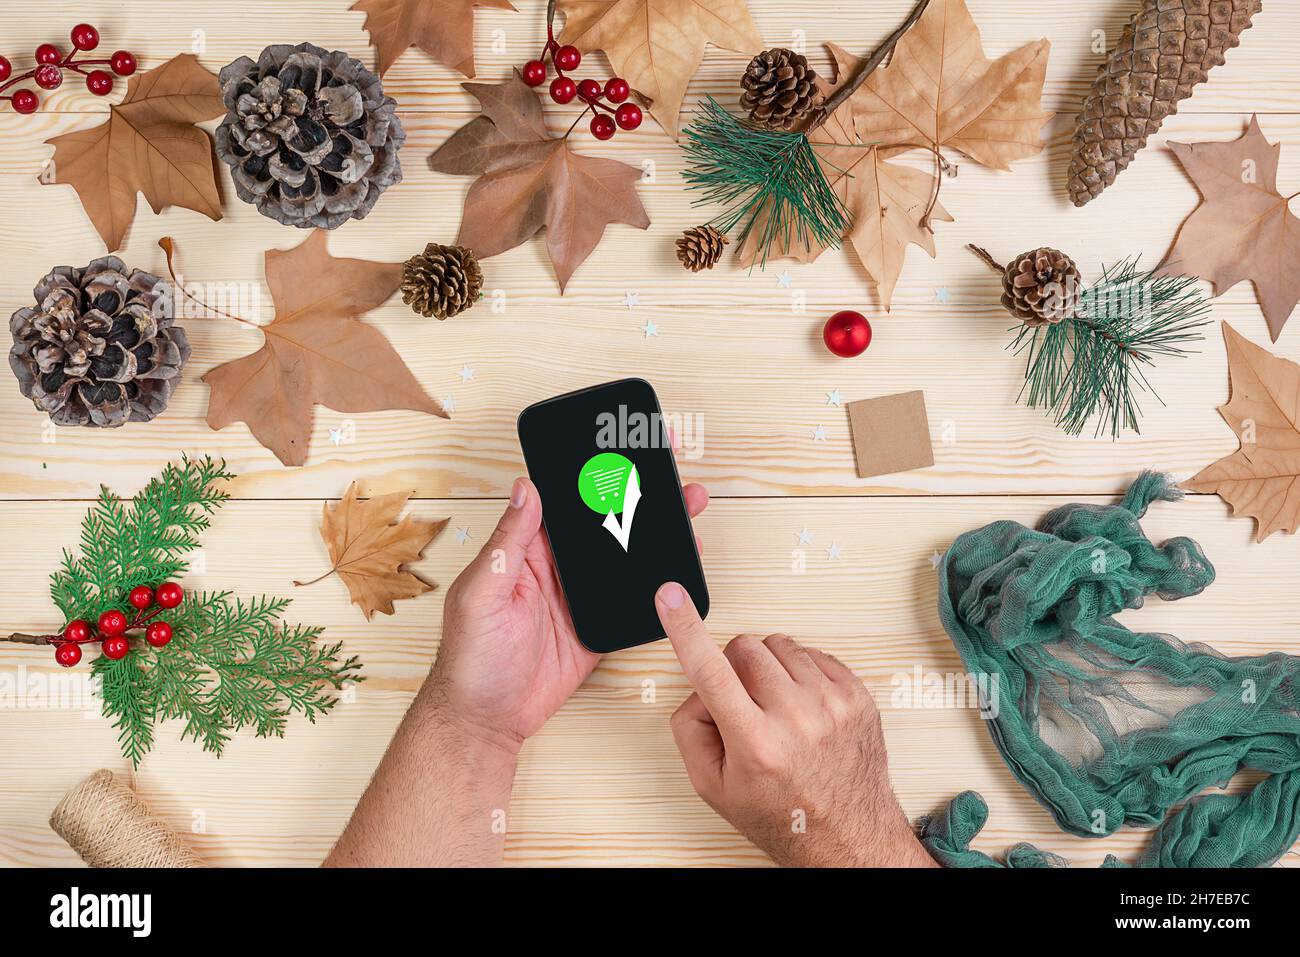 Top view of a wooden background with dried leaves and Christmas motifs with the hands of a man holding a cell phone after finishing his online shoppin Stock Photo